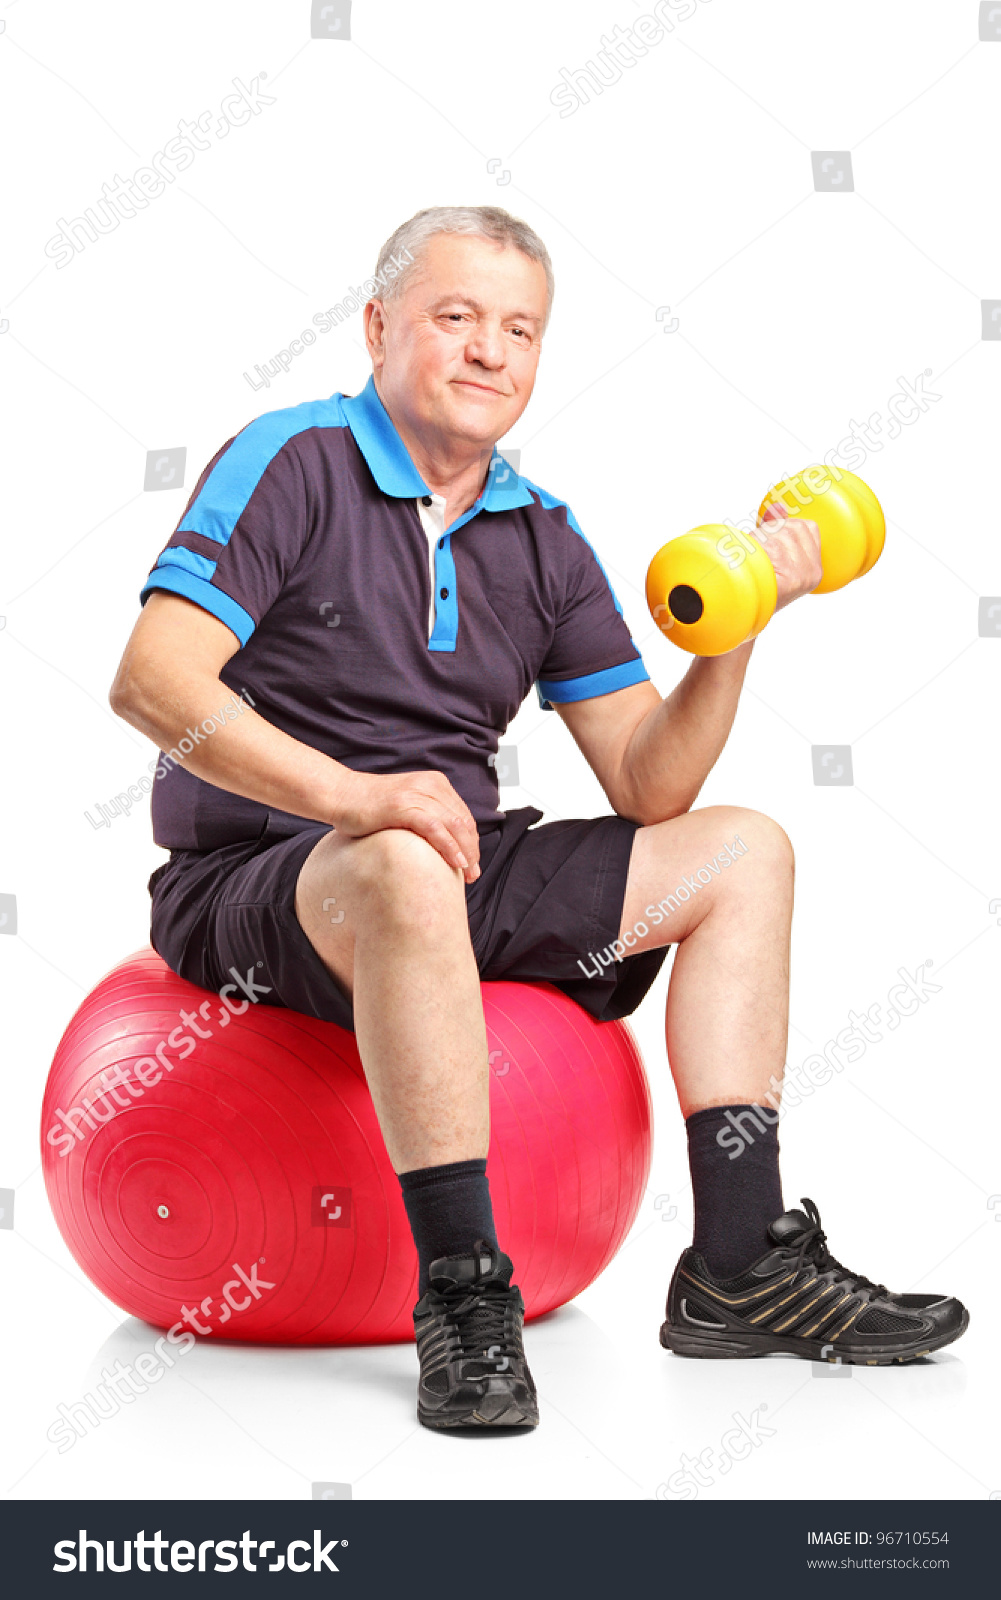 A Mature Man Lifting Up A Dumbbell Seated On A Fitness Ball Isolated On